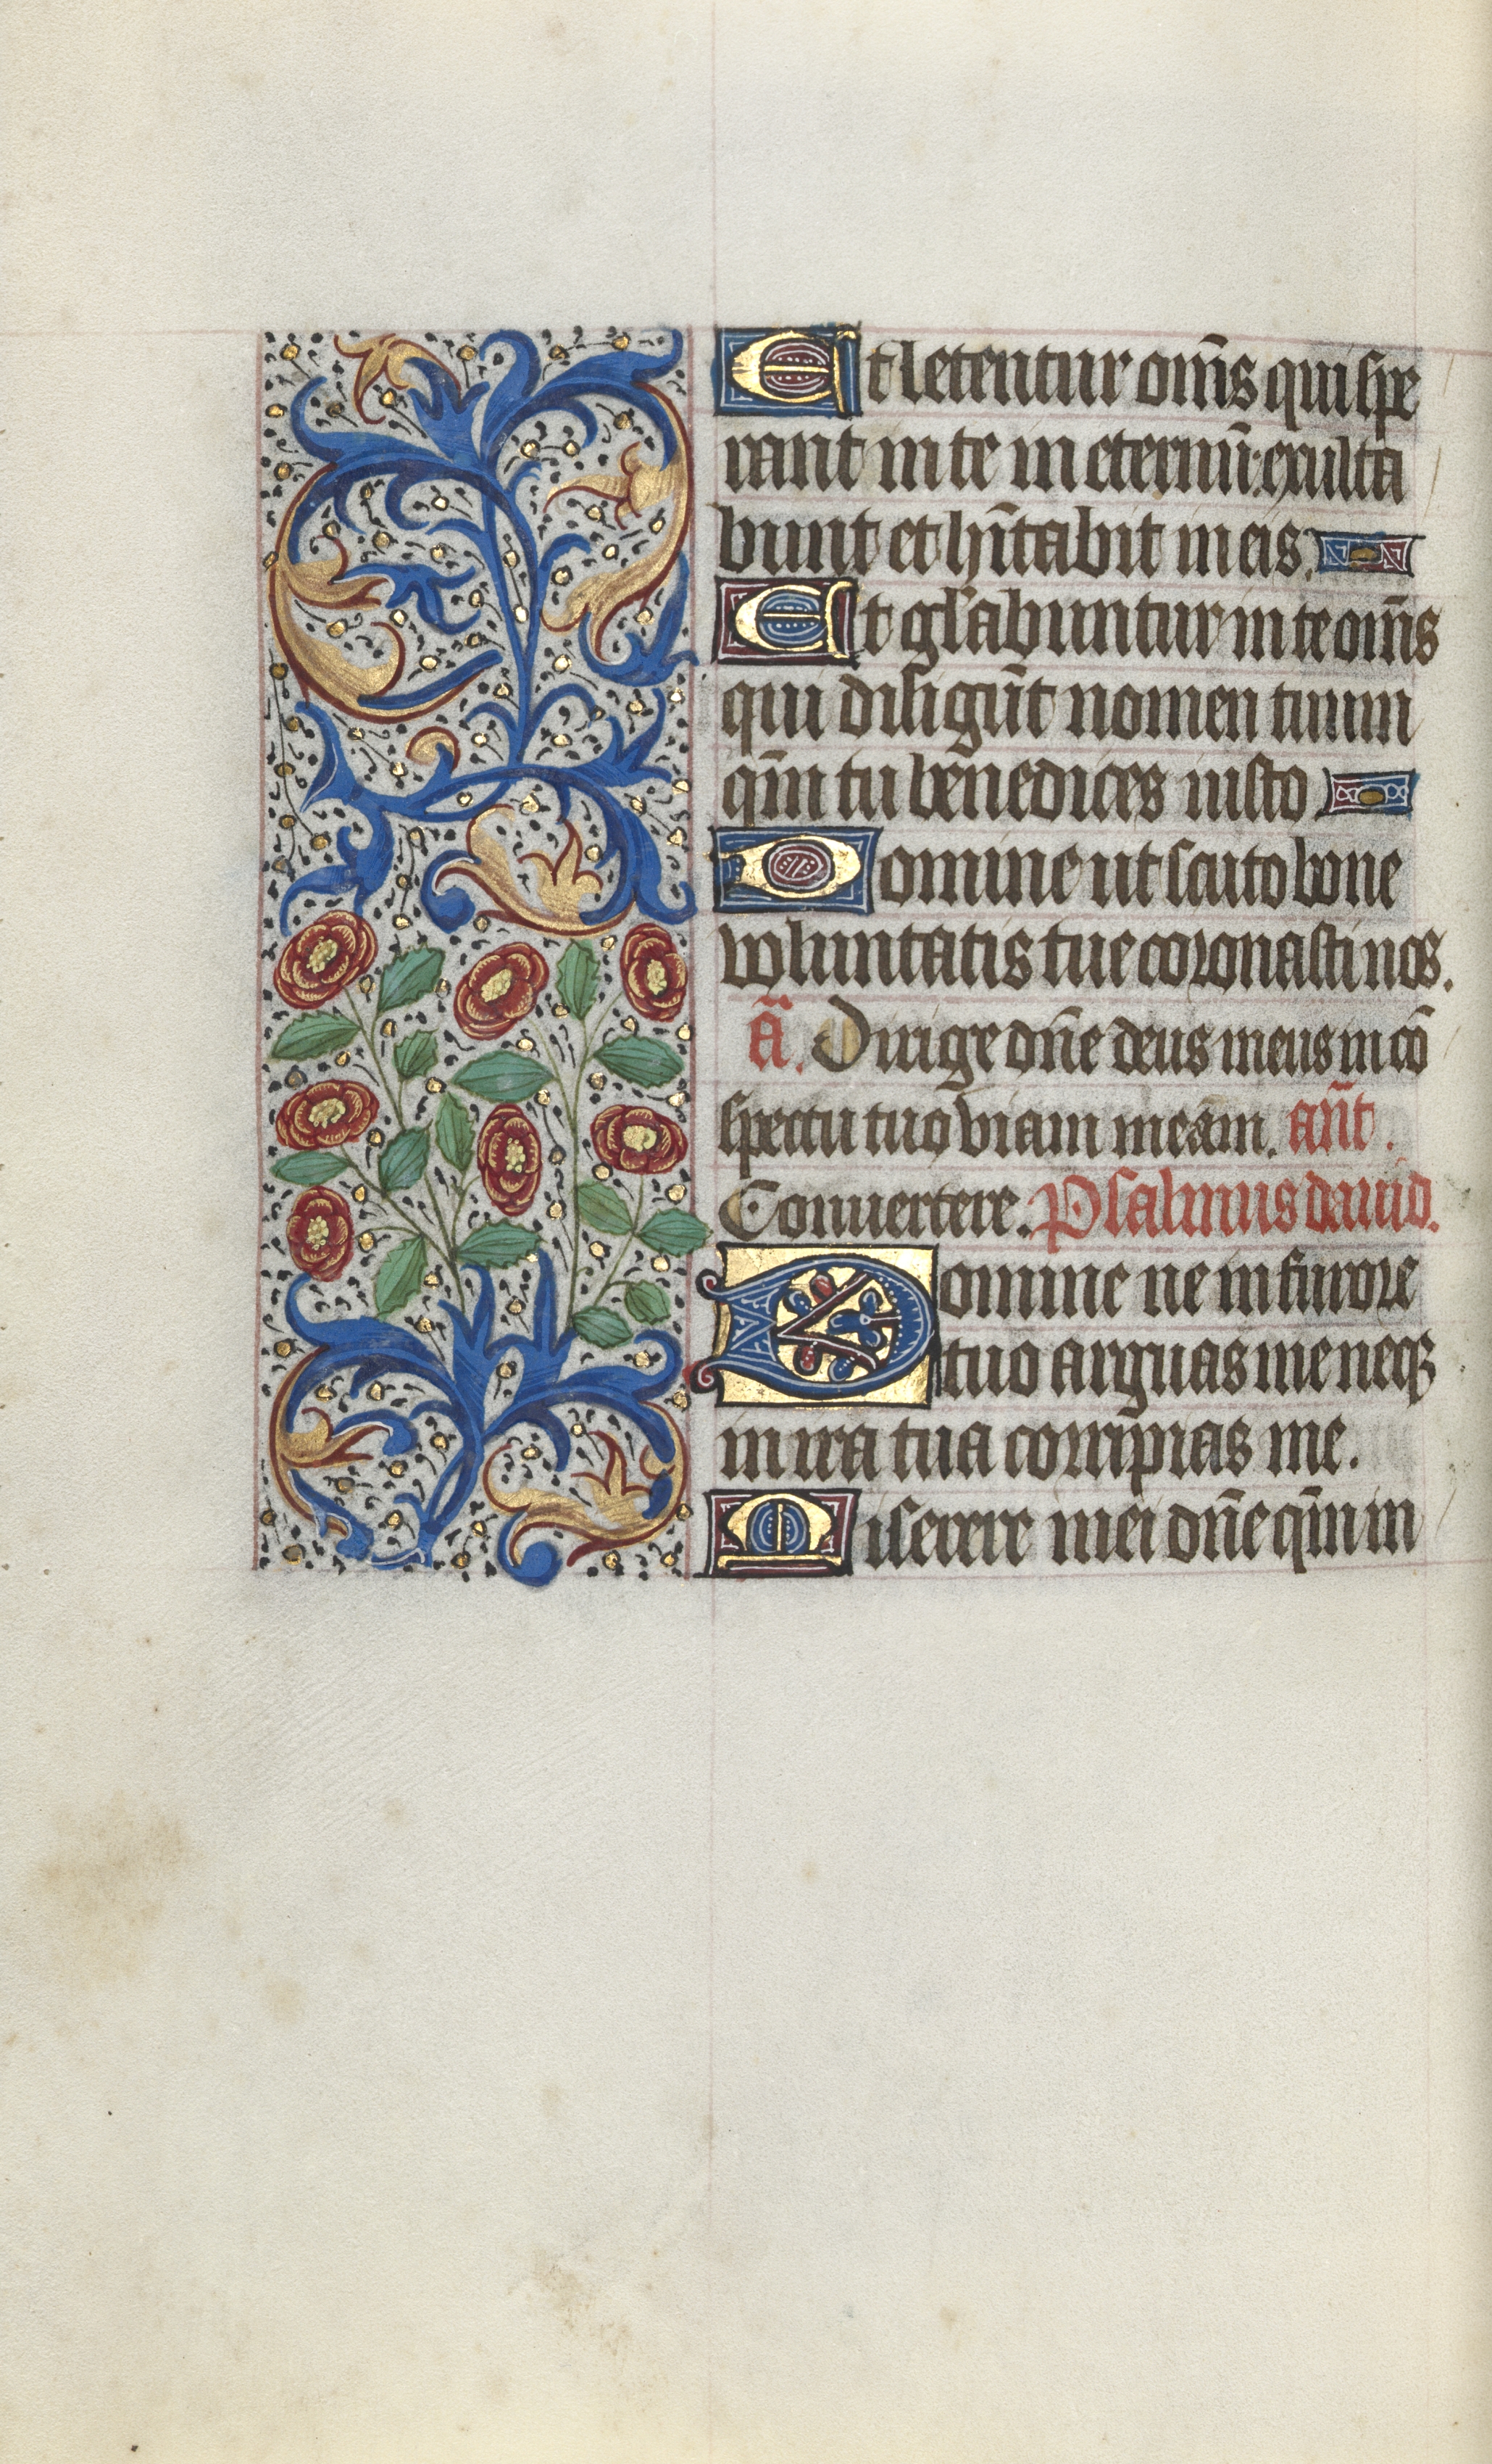 Book of Hours (Use of Rouen): fol. 111v